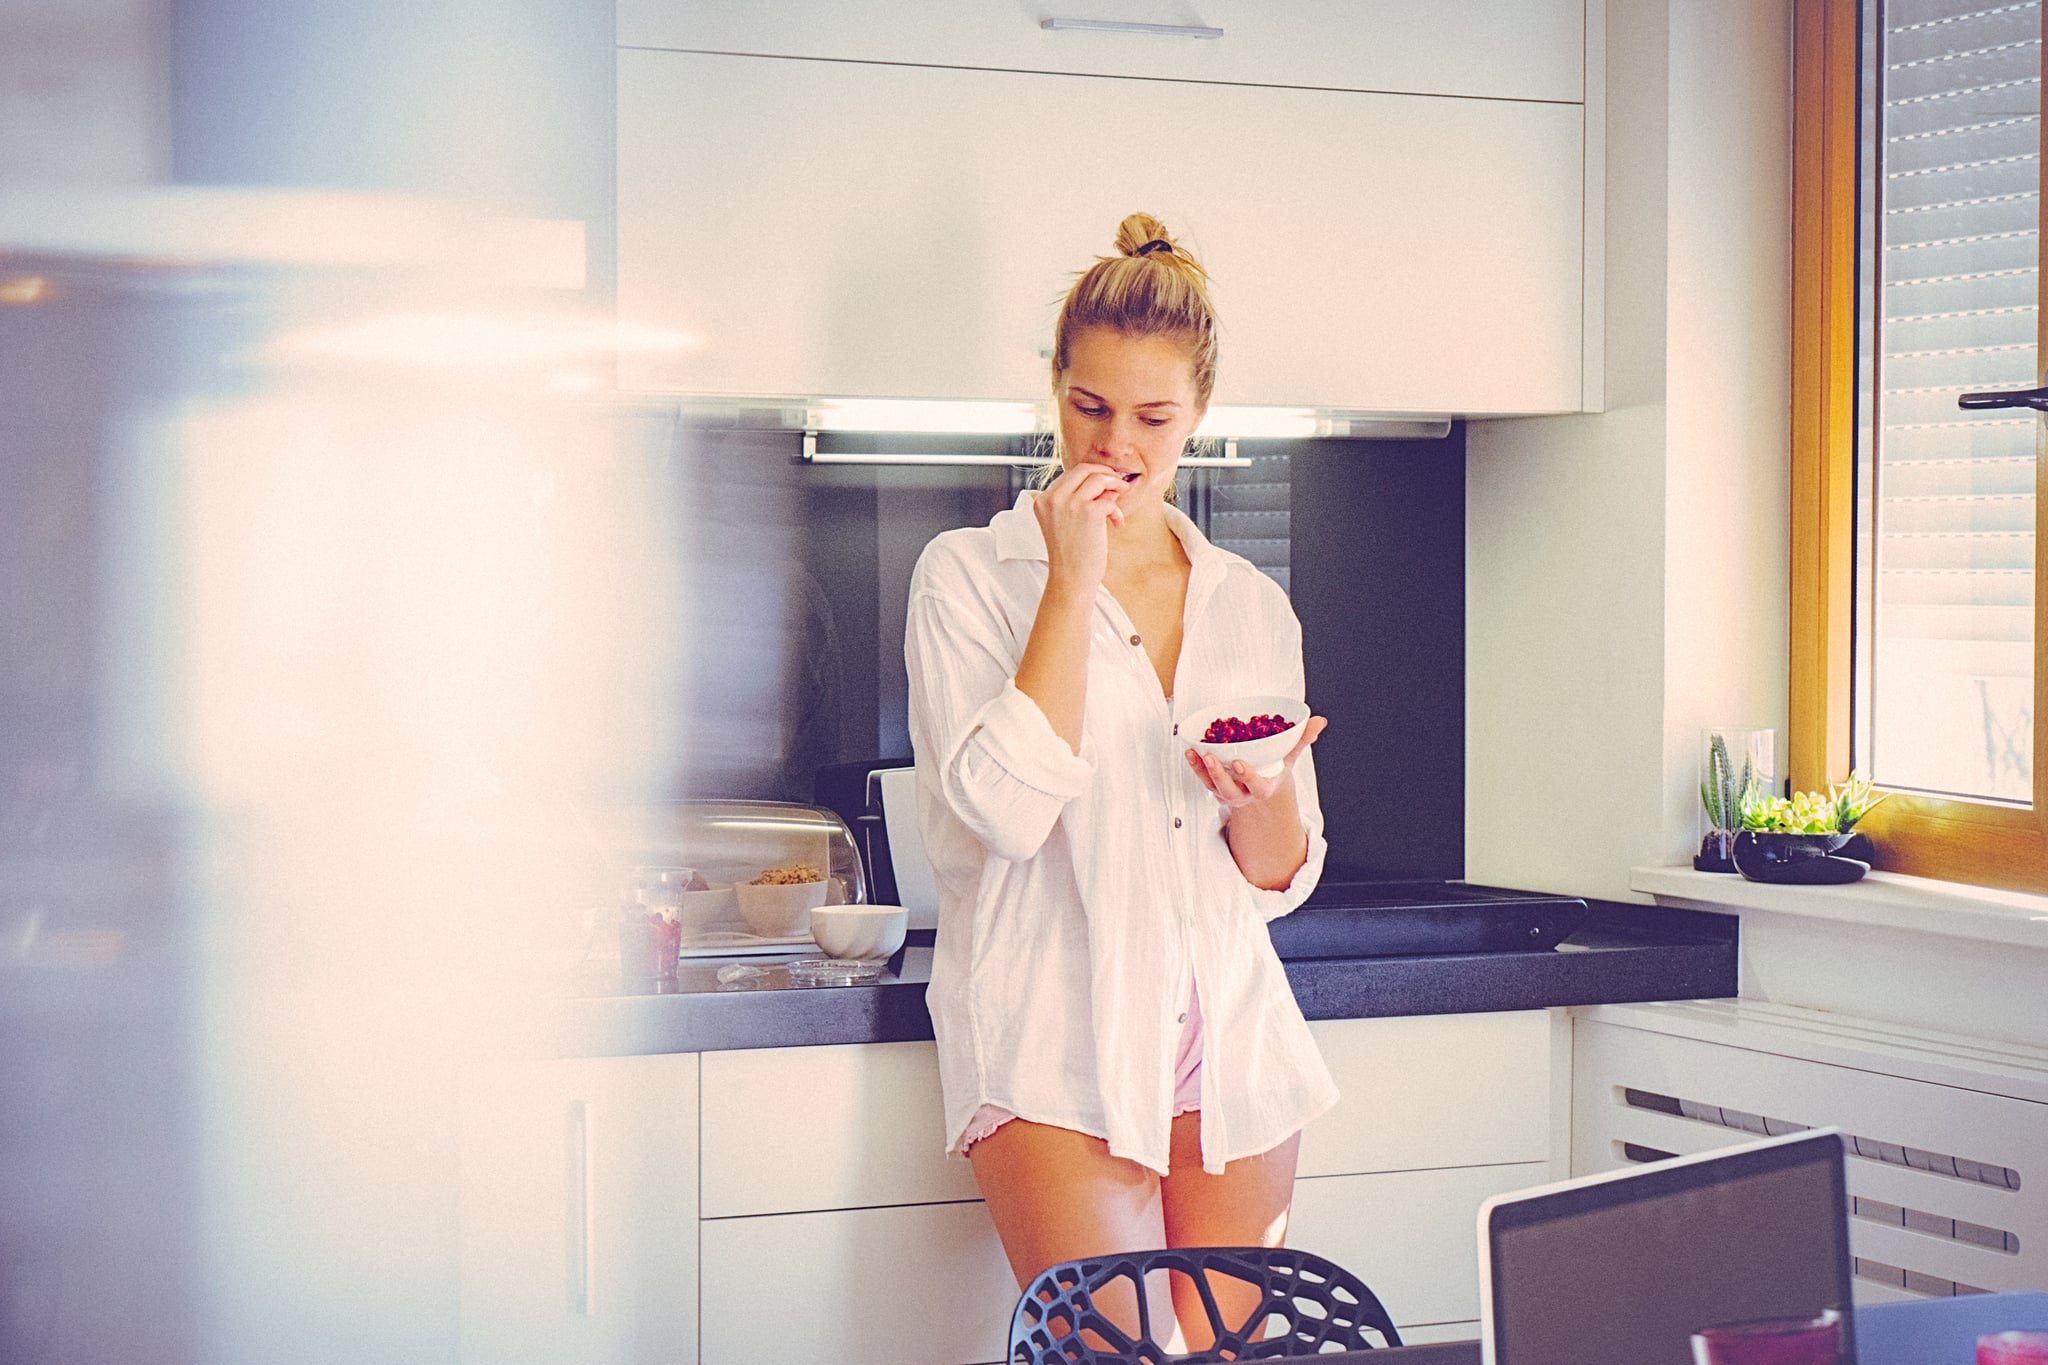 Attractive blonde woman in the morning, at home in the kitchen, eating pomegranate. The woman is dressed in pajamas and it seems that she recently got out of the bed and started to prepare breakfast. Her long blonde hair is swept back from her face. She seems sleepy. The shot is executed with available natural light, and the copy space has been left. Shallow DOF. Soft focussed.